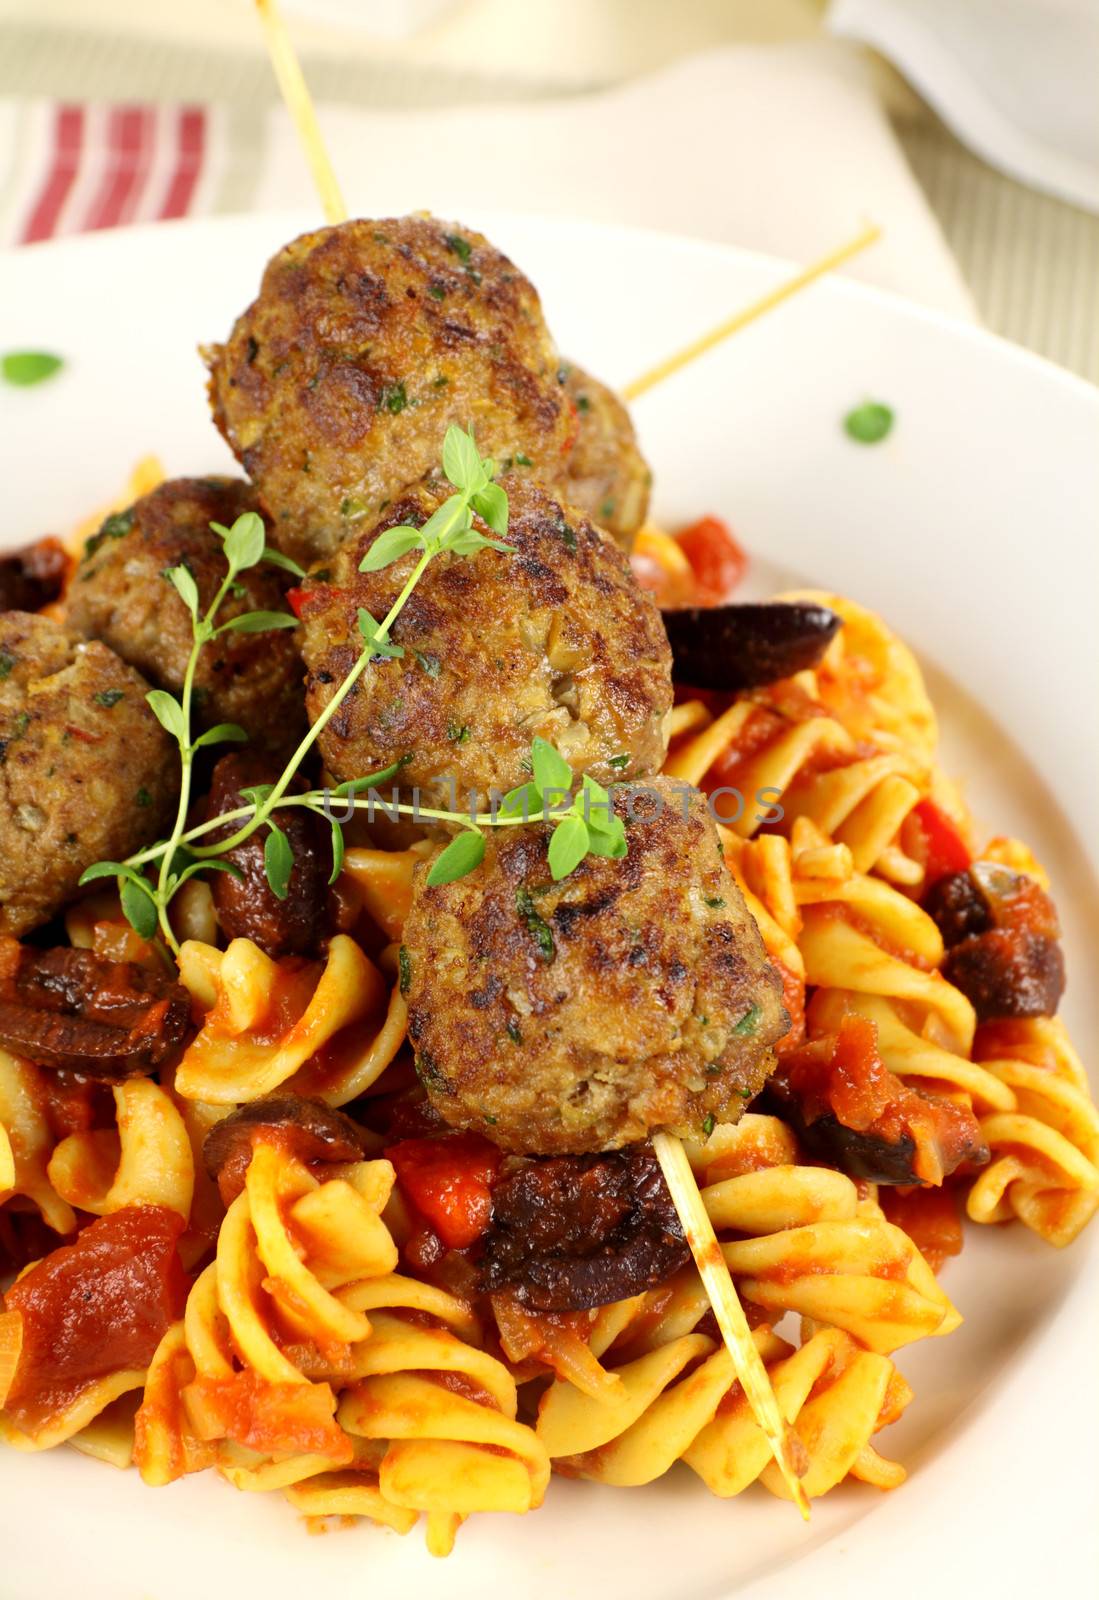 Delicious beef meatballs on tomato and olive pasta.